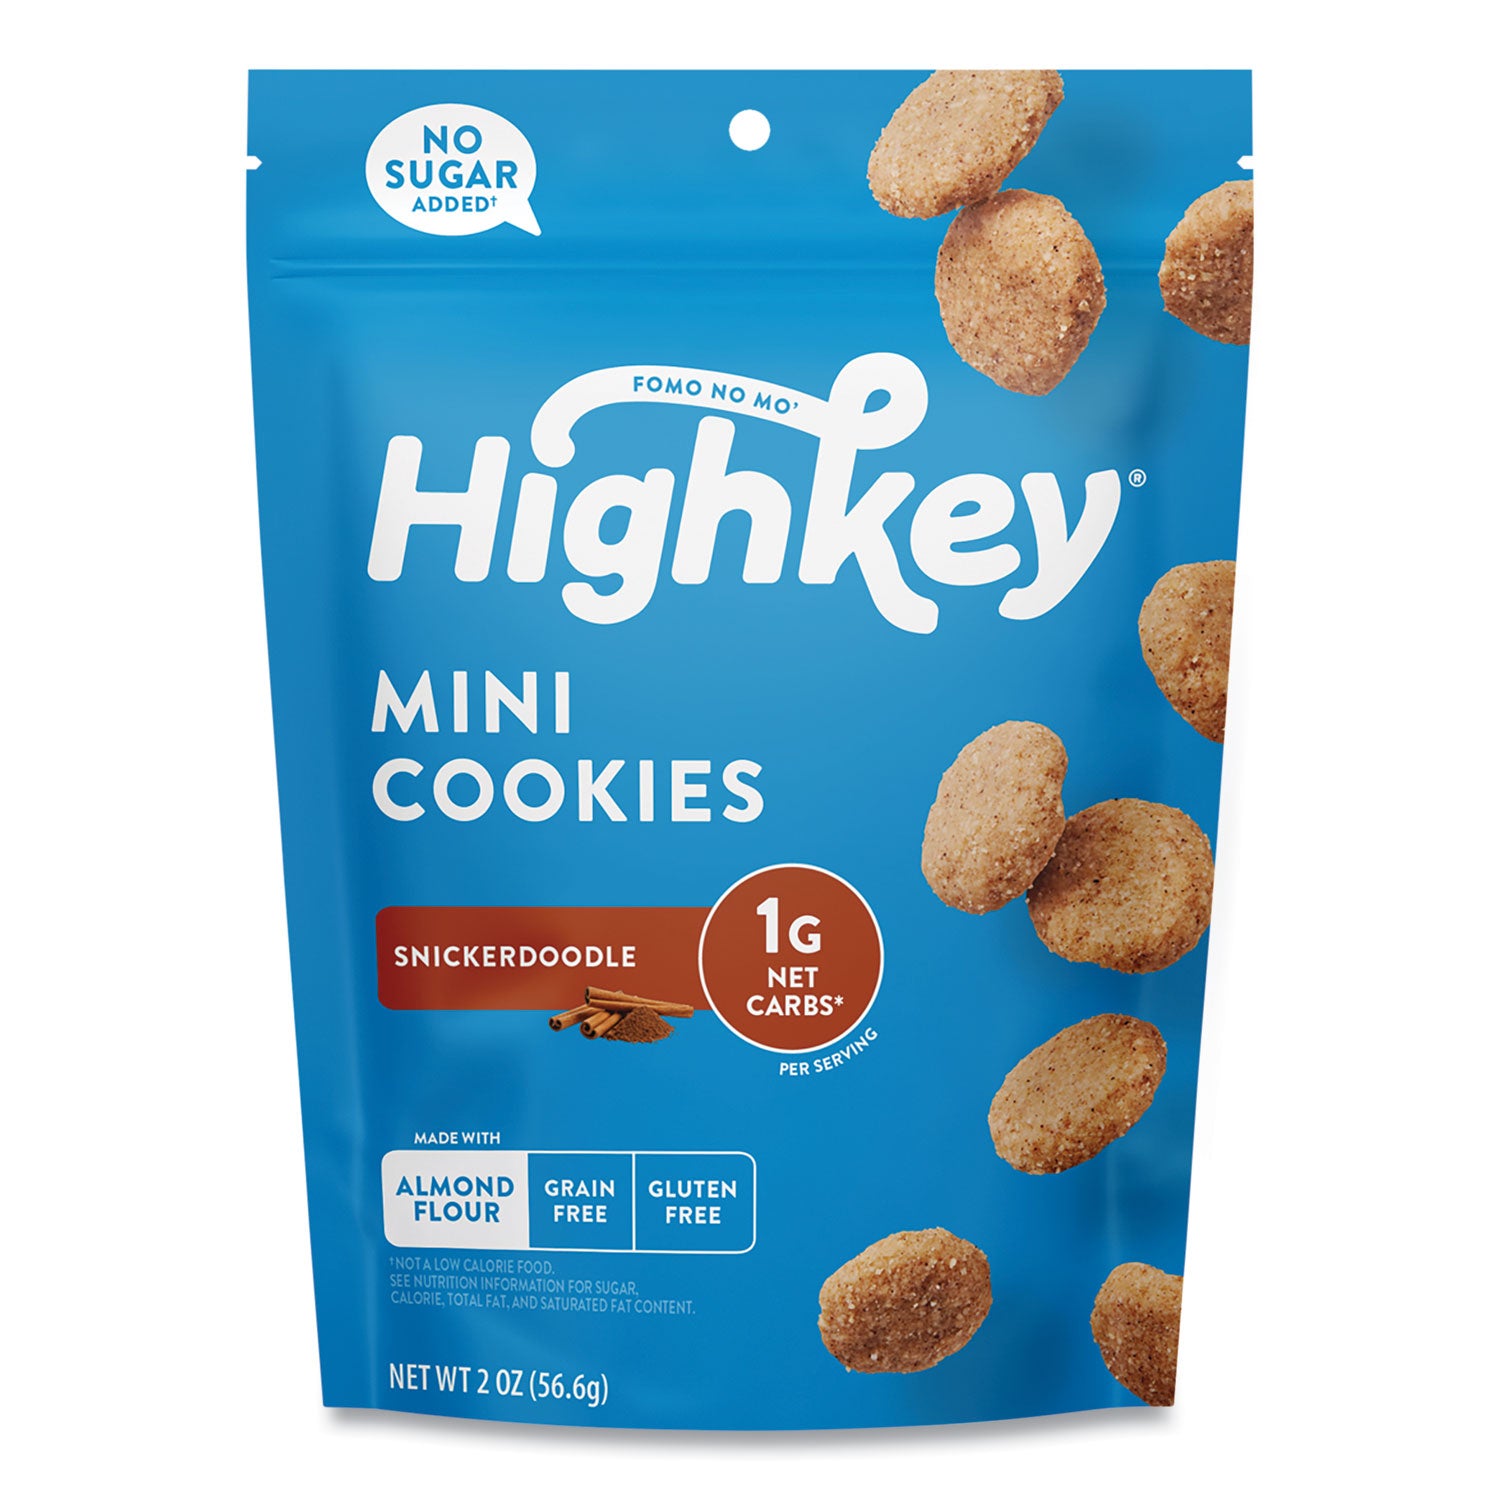 snickerdoodle-cookies-snickerdoodle-2-oz-bag-6-carton-ships-in-1-3-business-days_grr60000271 - 2